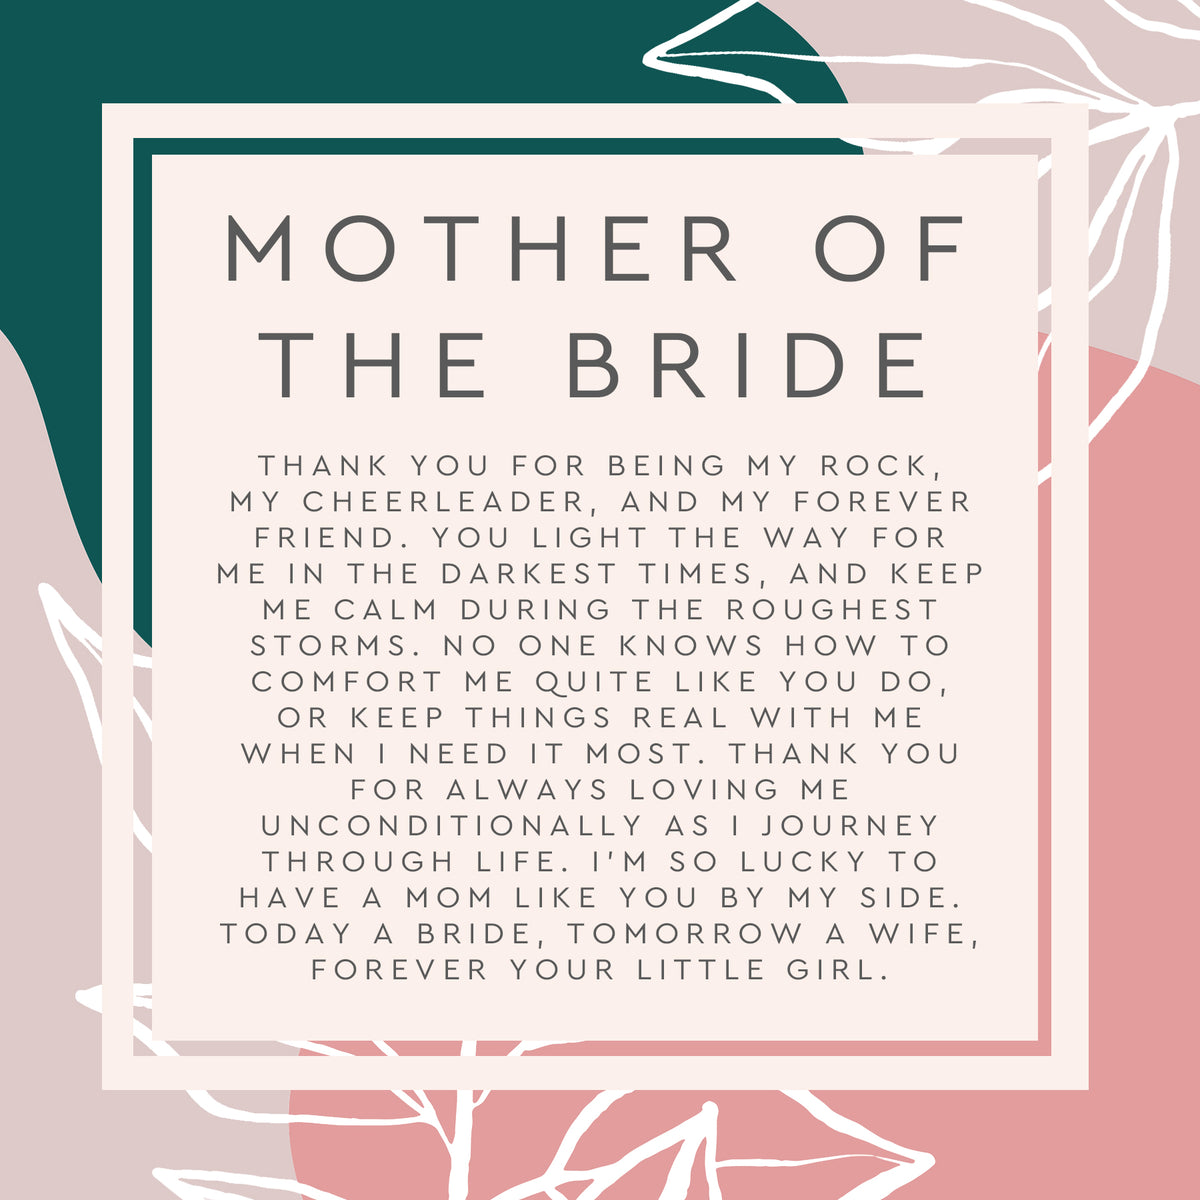 Mother of the Bride Spa Gift Box